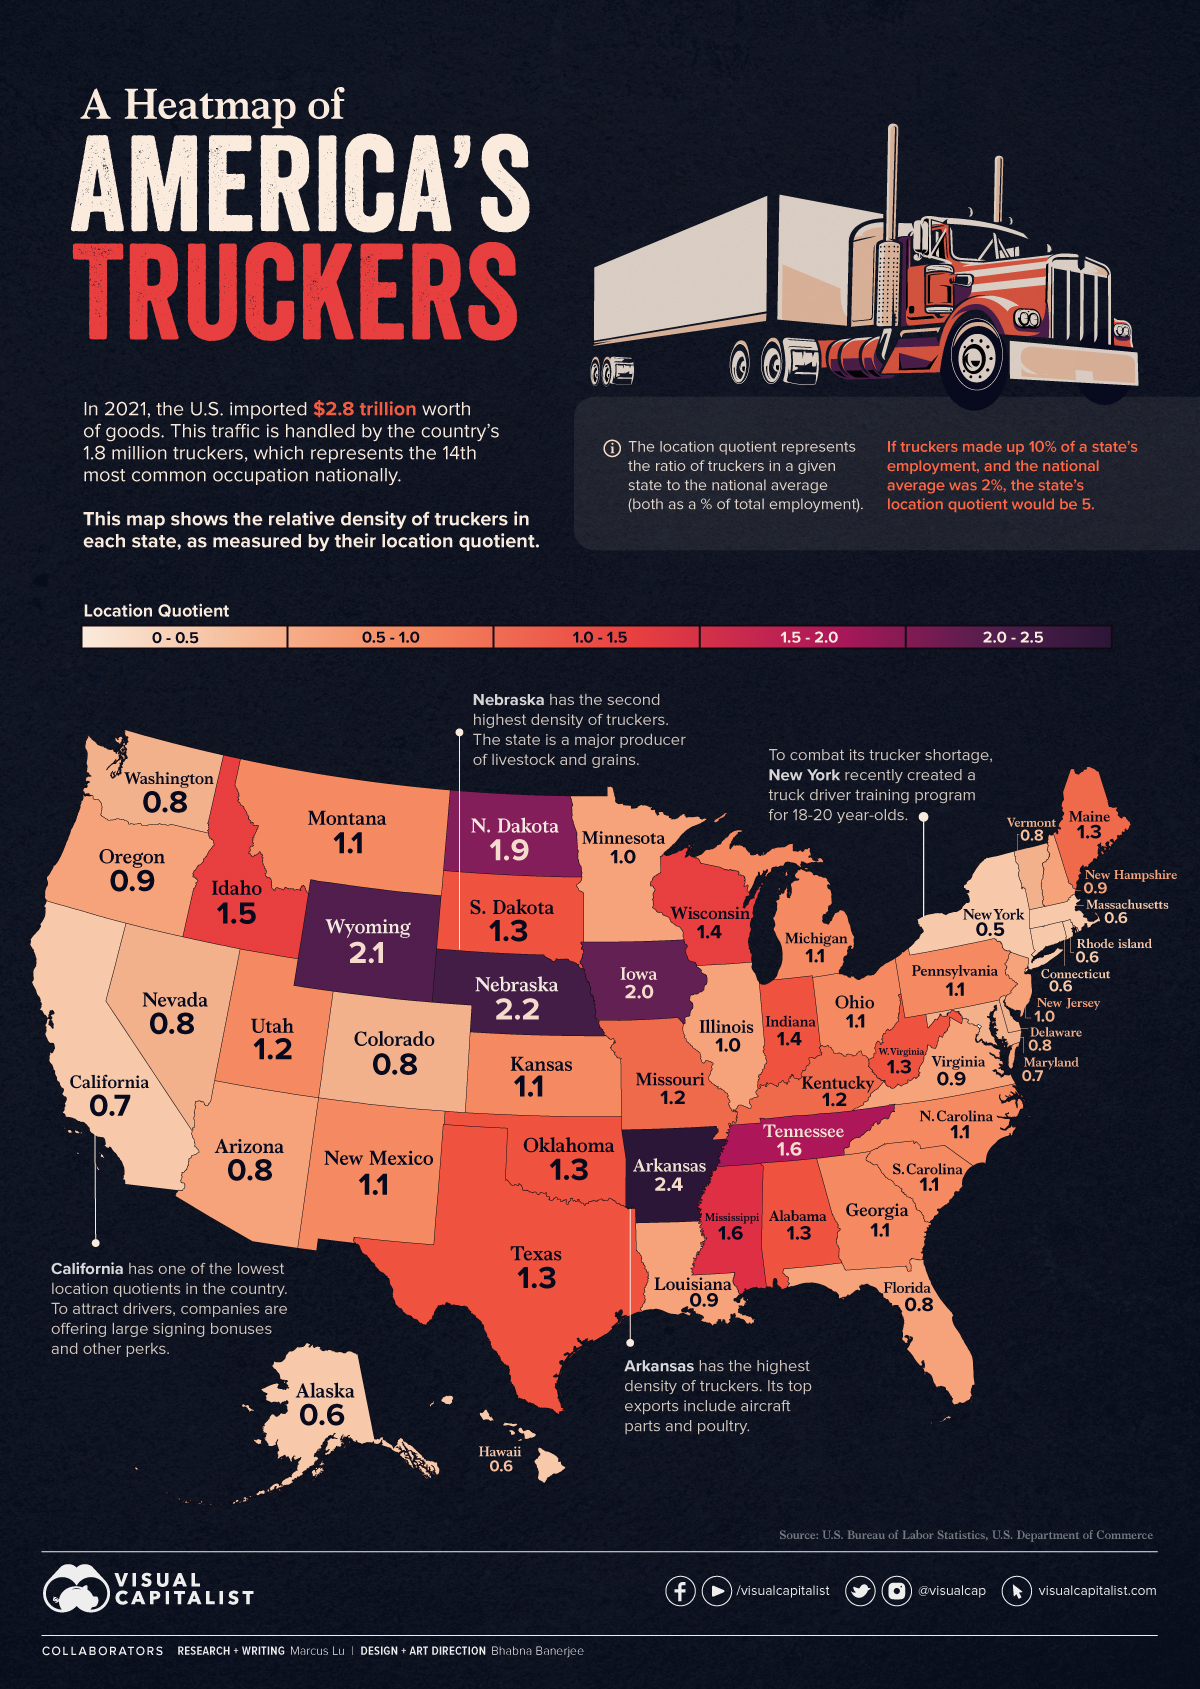 Mapped Where America’s Truckers Live, by State RERRI.CASA